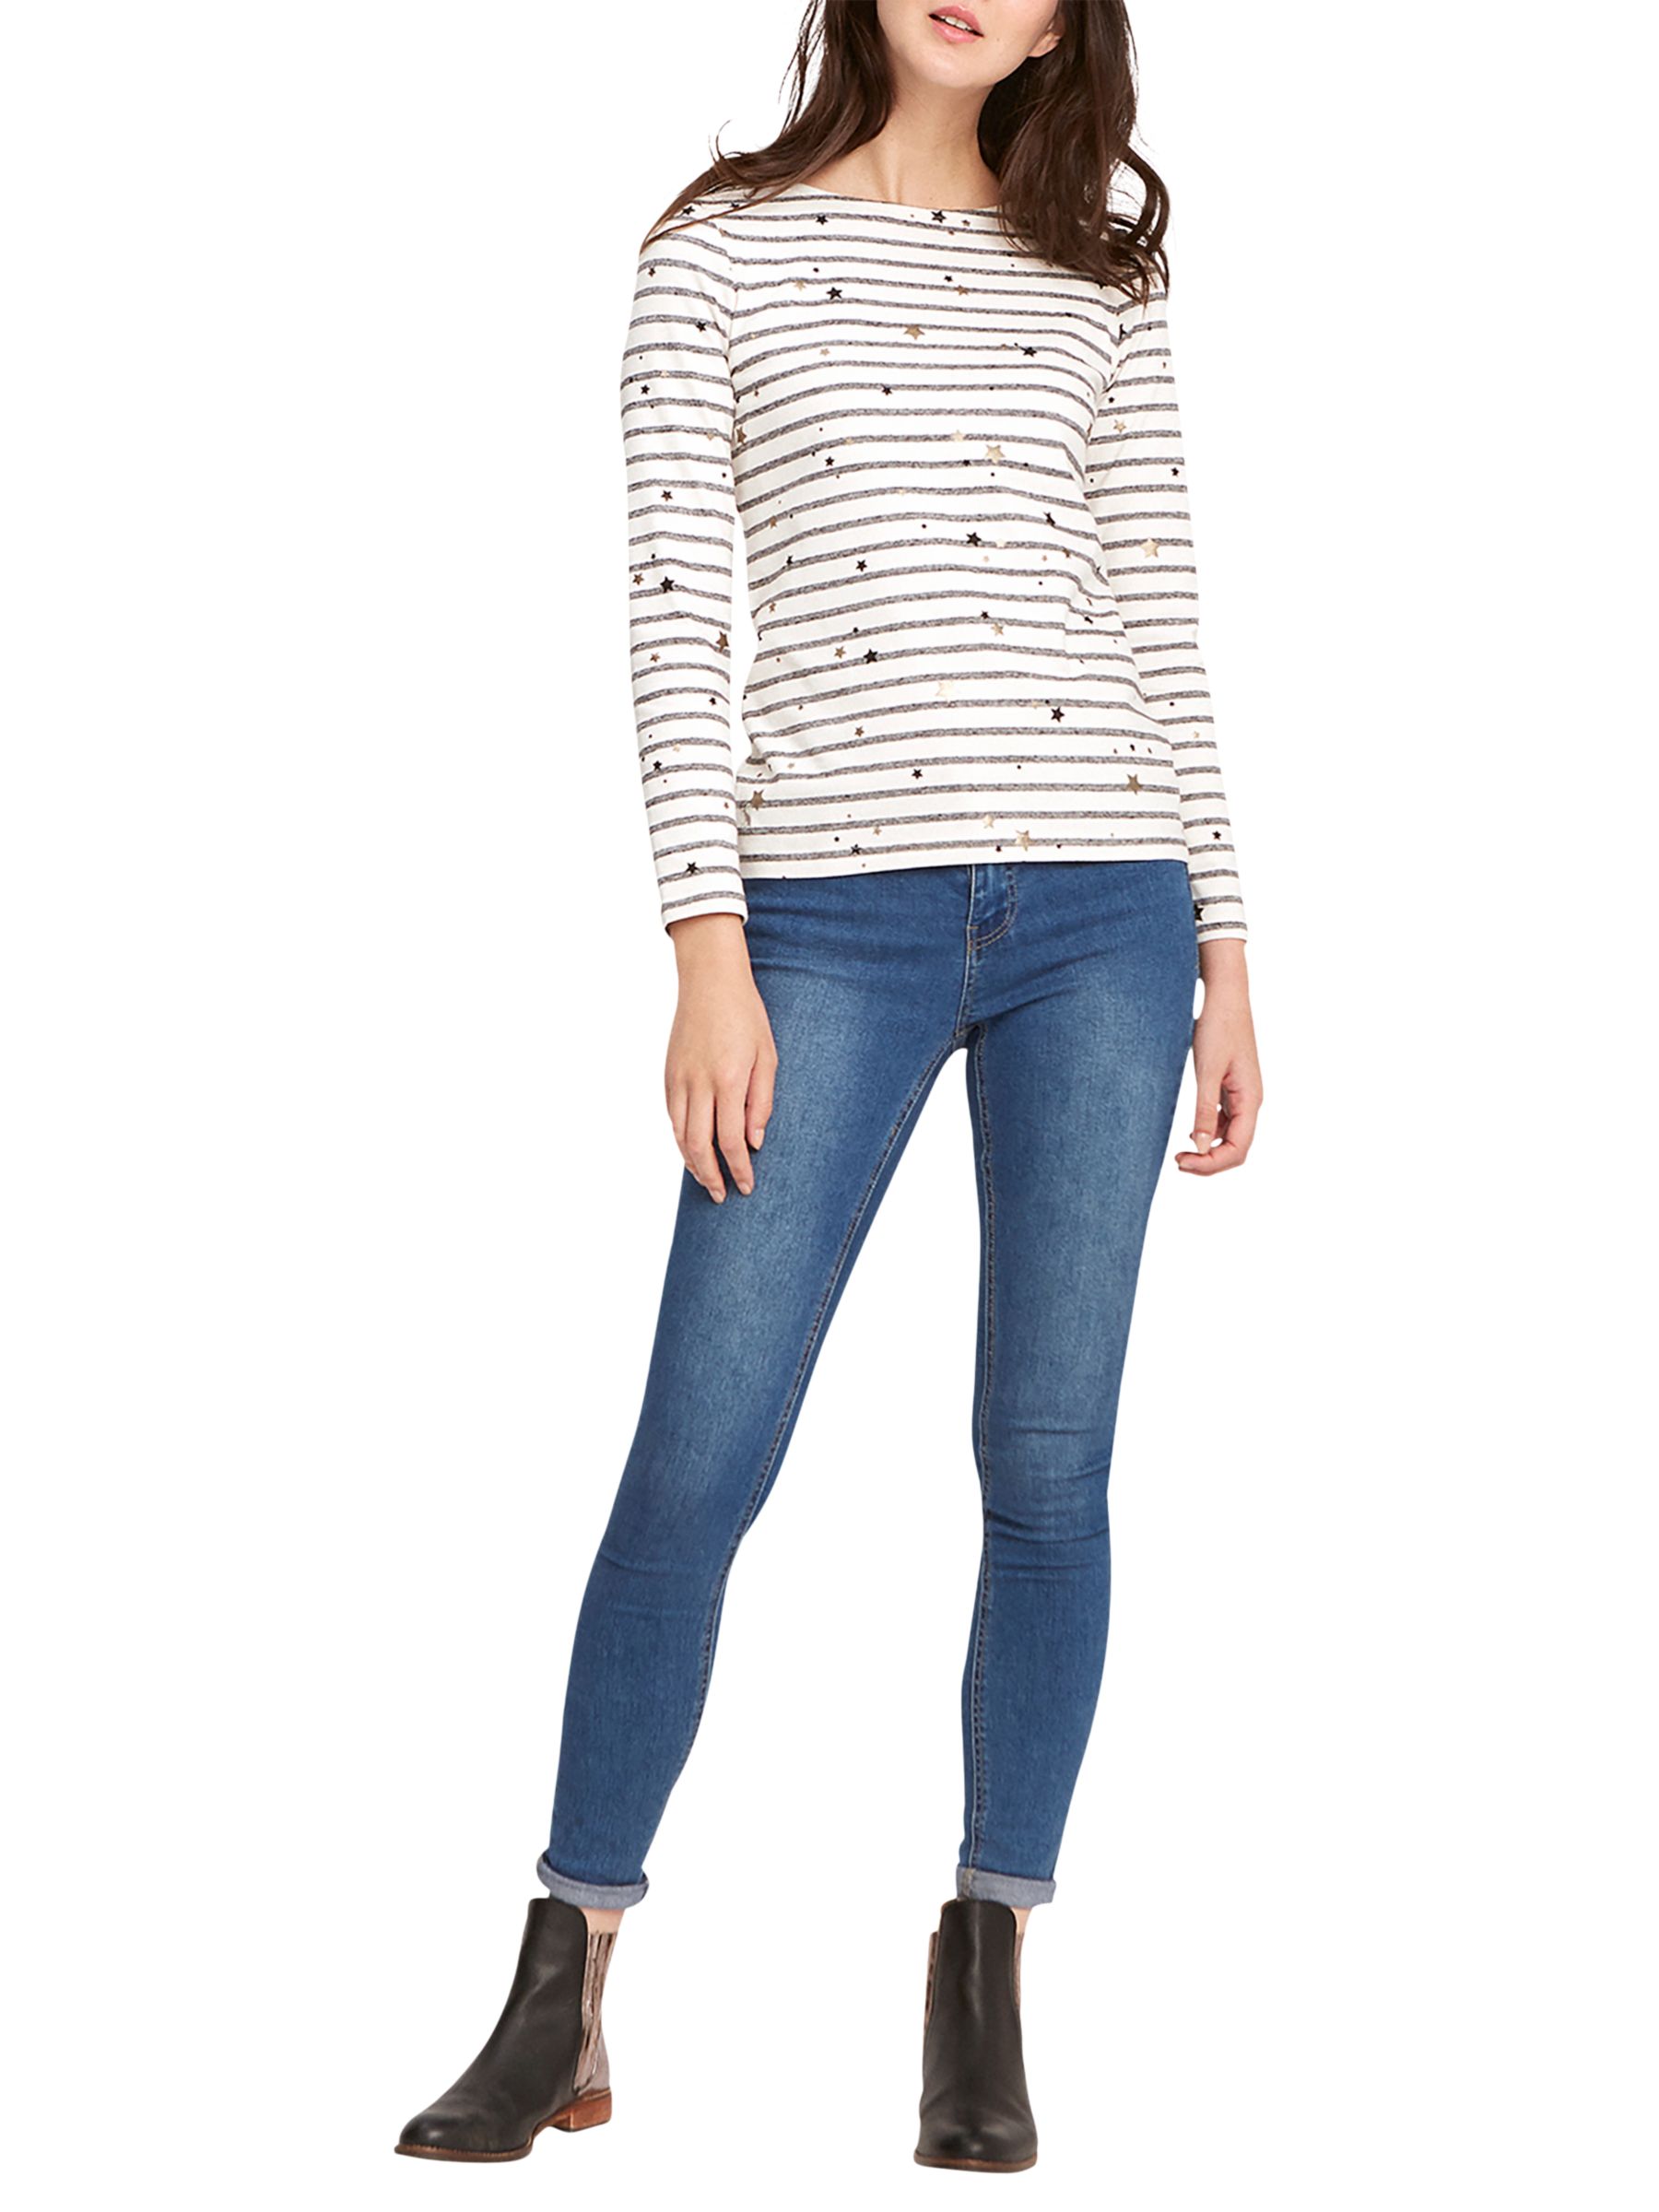 Joules Harbour Star Striped Jersey Top, Grey at John Lewis & Partners